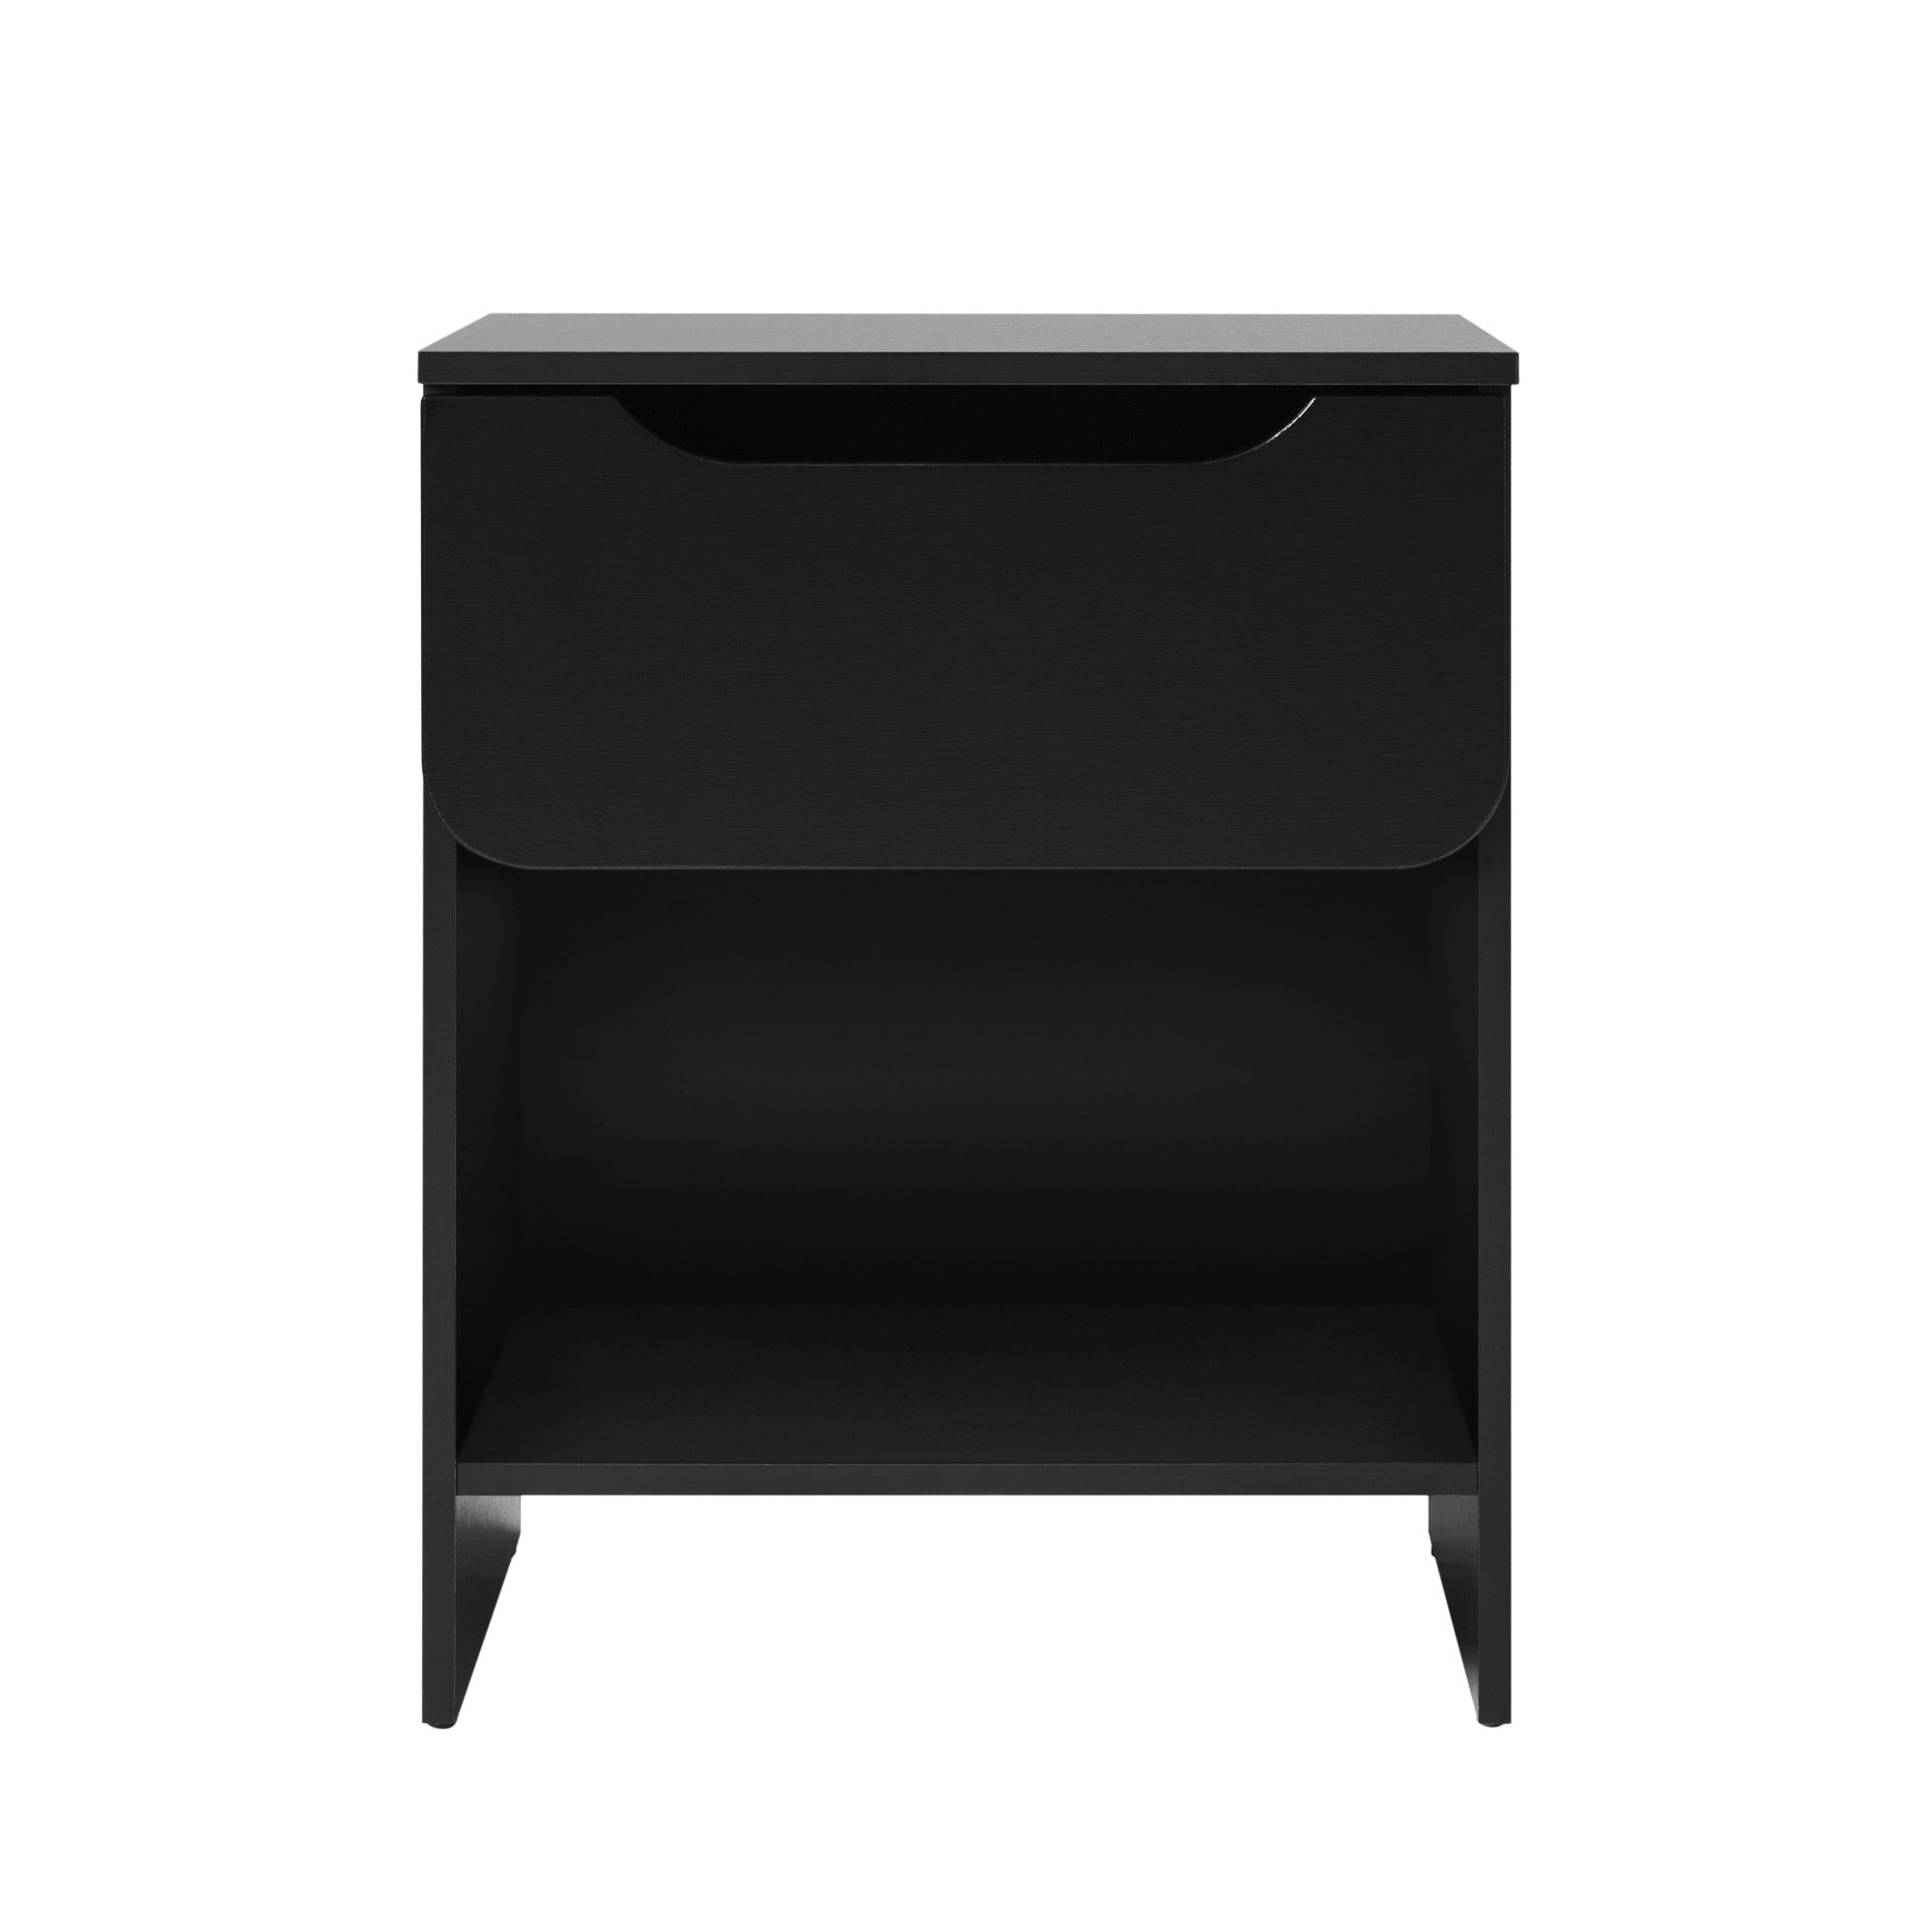 Minimalist 1-Drawer Nightstand with Cubby - Nightstands